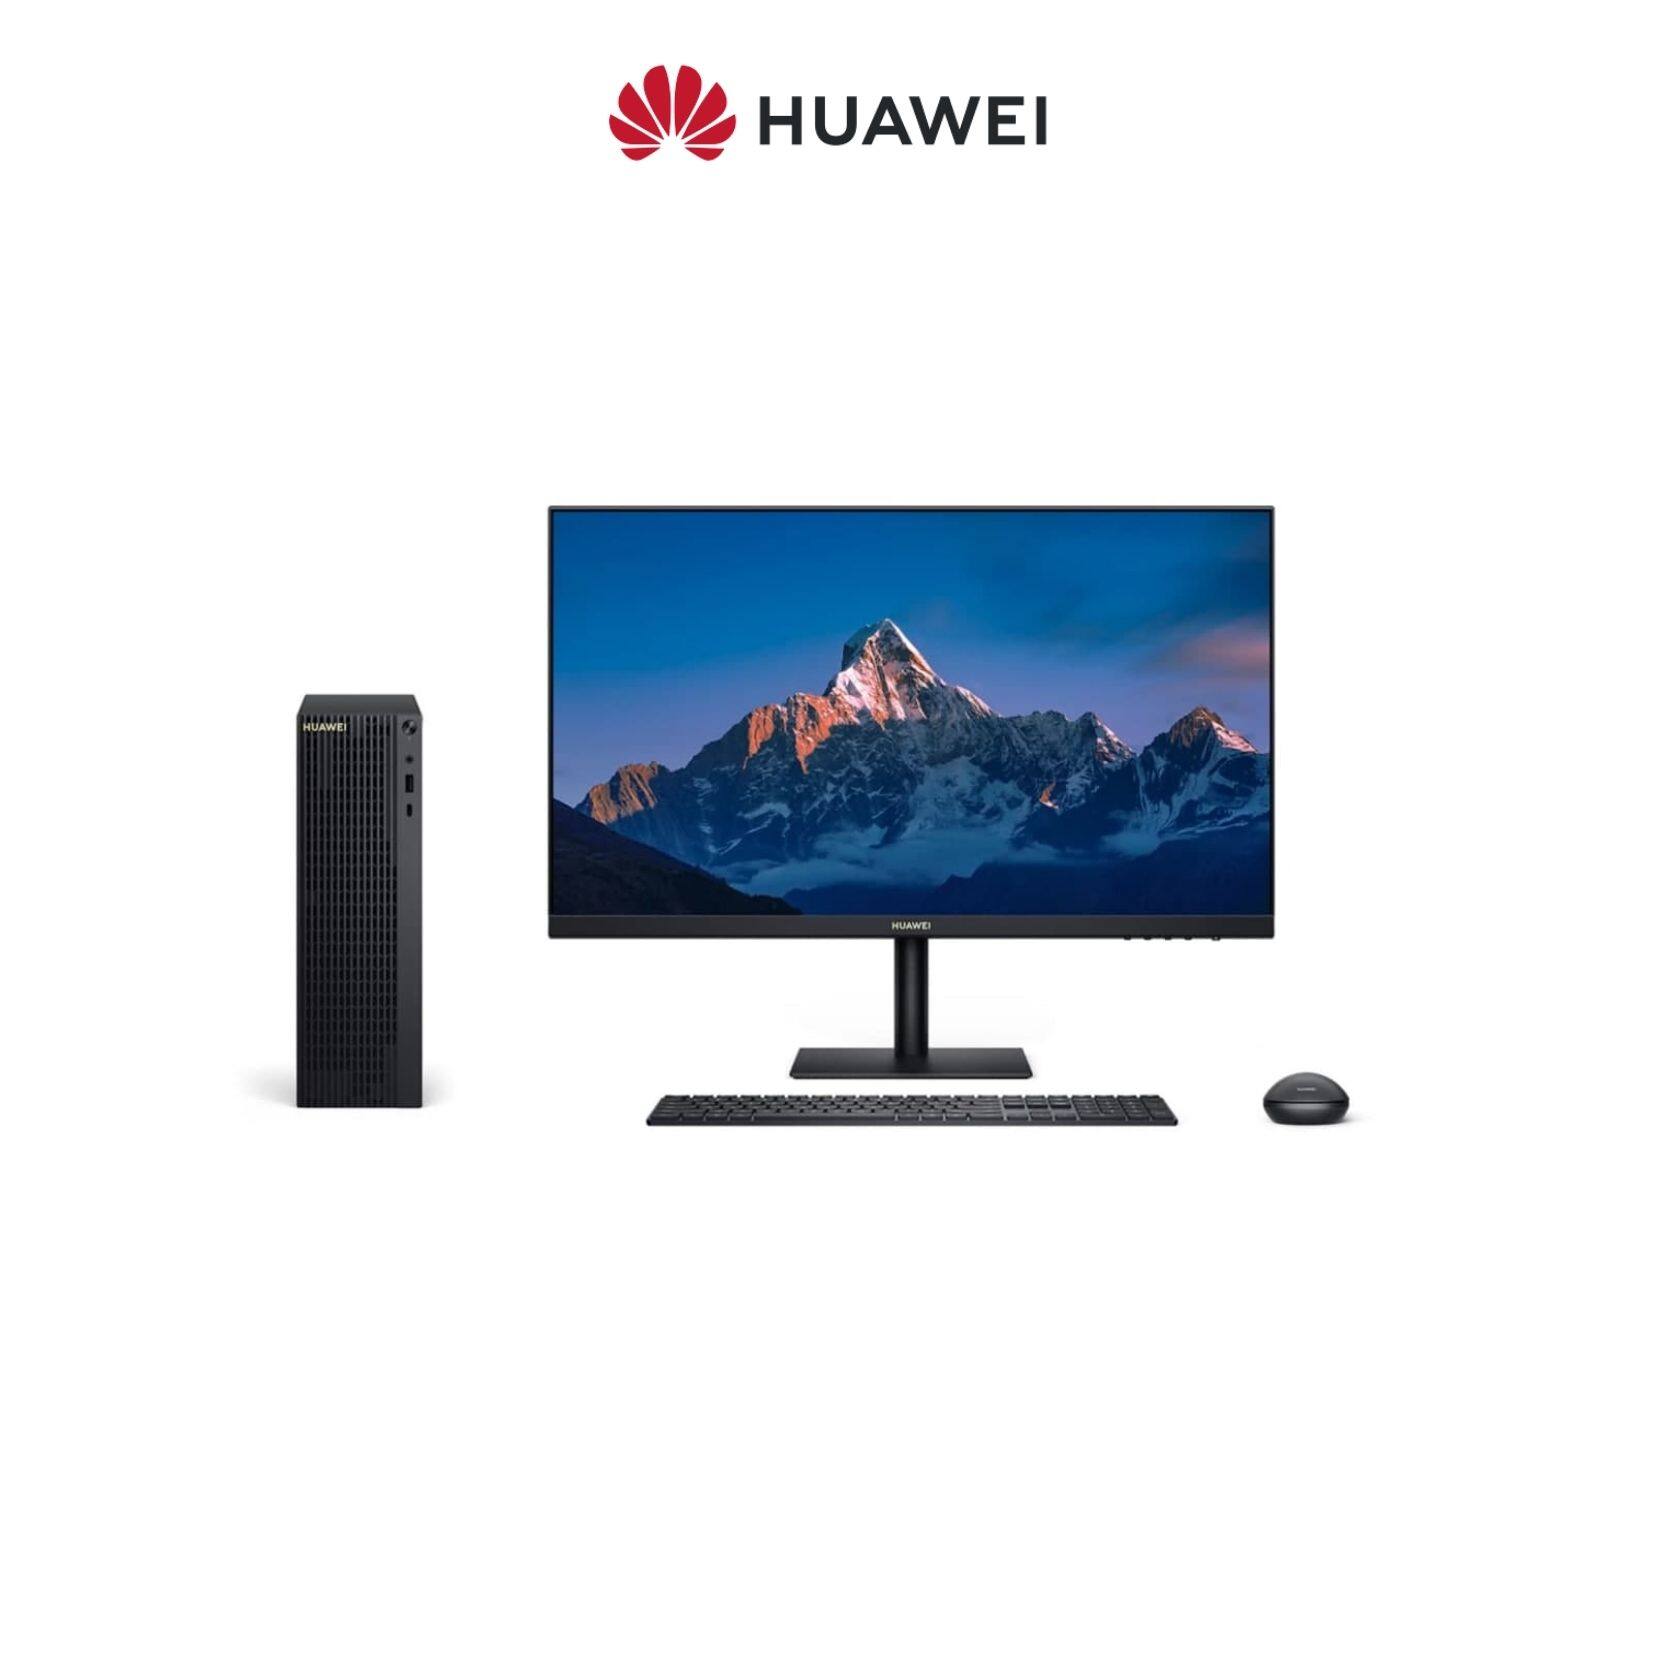 HUAWEI MateStation S R5 [ 8GB + 256GB + Radeon ] Space Grey Desktop - Small From Factor | Sleep-conducive Noise Levels | Fingerprint Security | Huawei Share